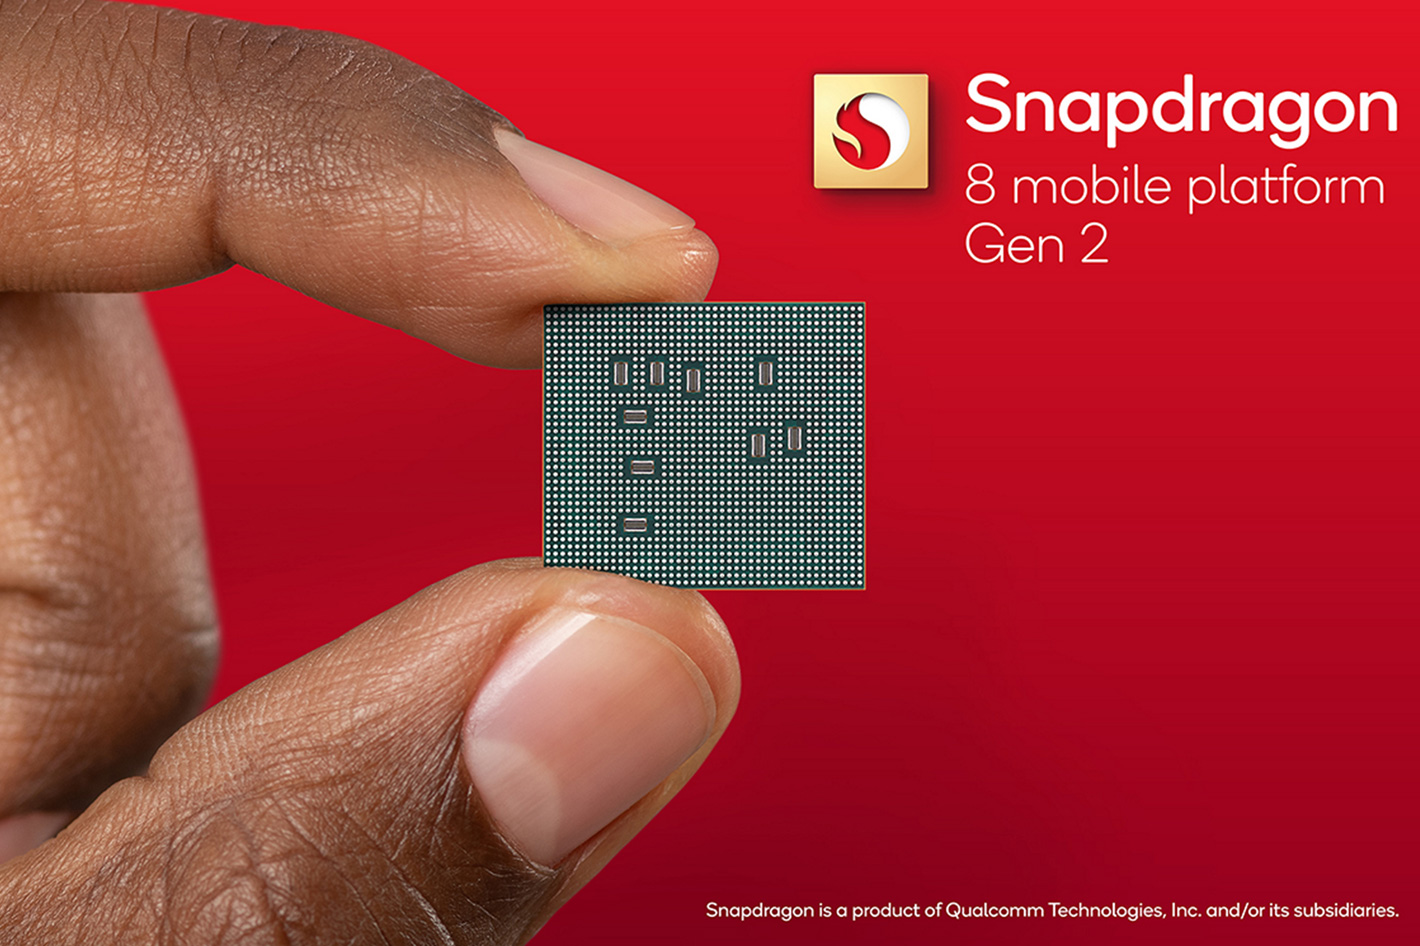 Snapdragon 8 Gen 2 brings Cognitive ISP to video and photo by Jose Antunes  - ProVideo Coalition